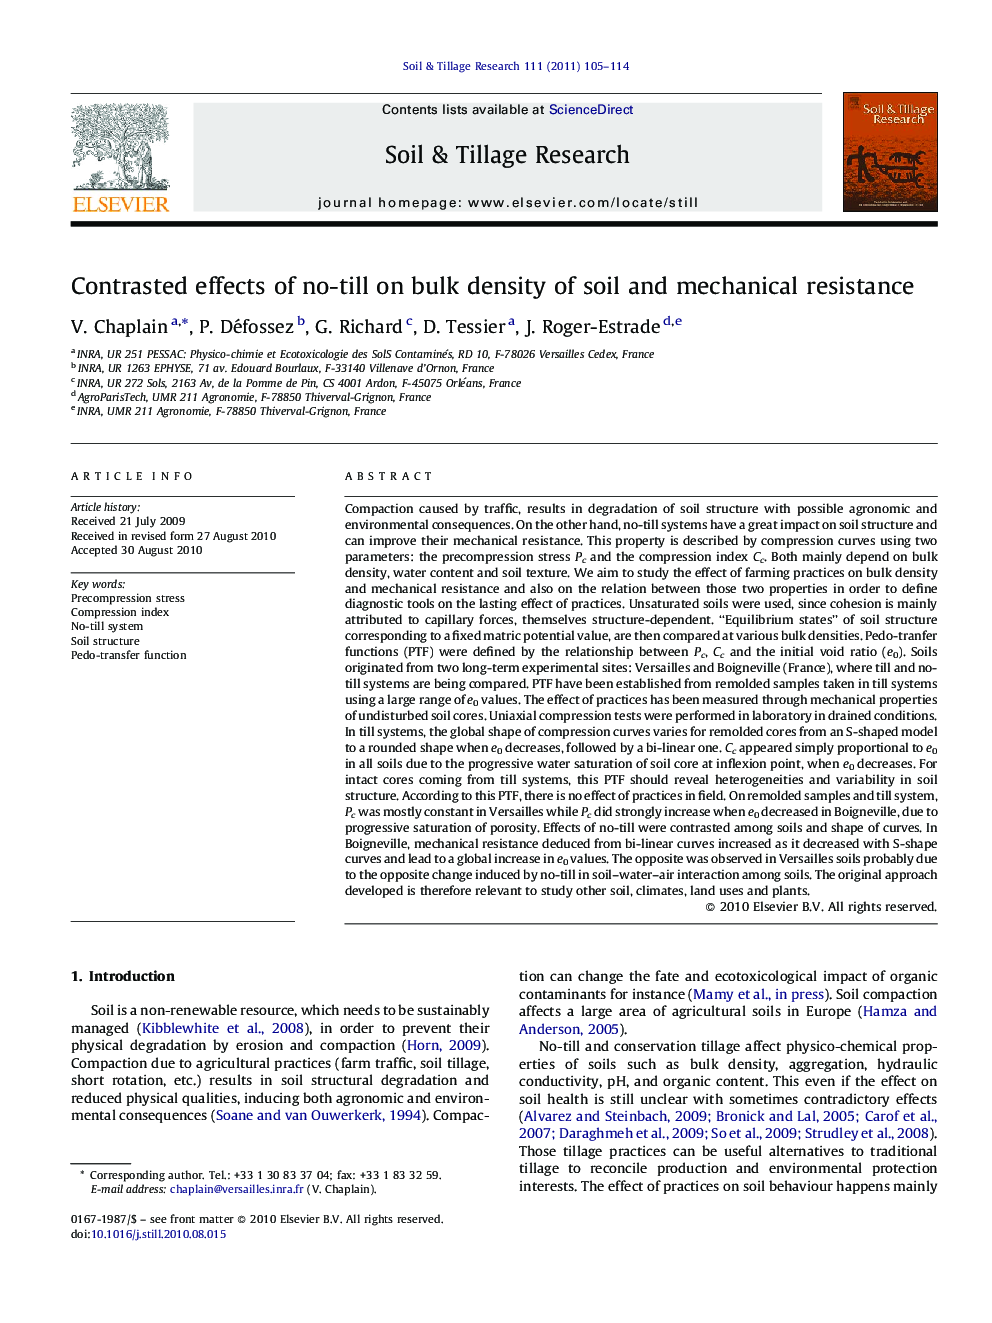 Contrasted effects of no-till on bulk density of soil and mechanical resistance